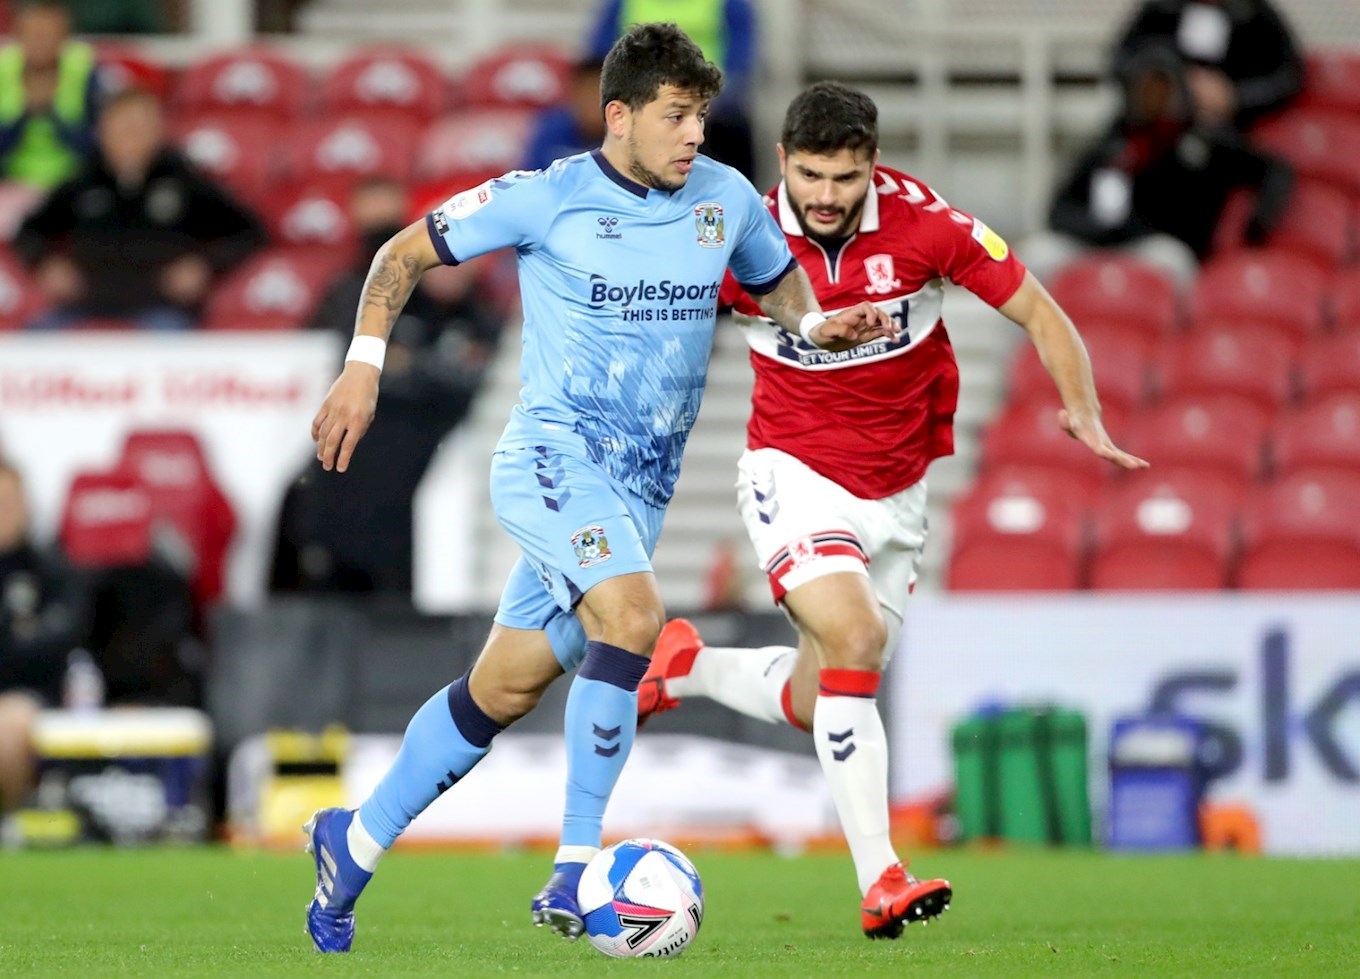 REPORT: Middlesbrough 2-0 Sky Blues - News - Coventry City